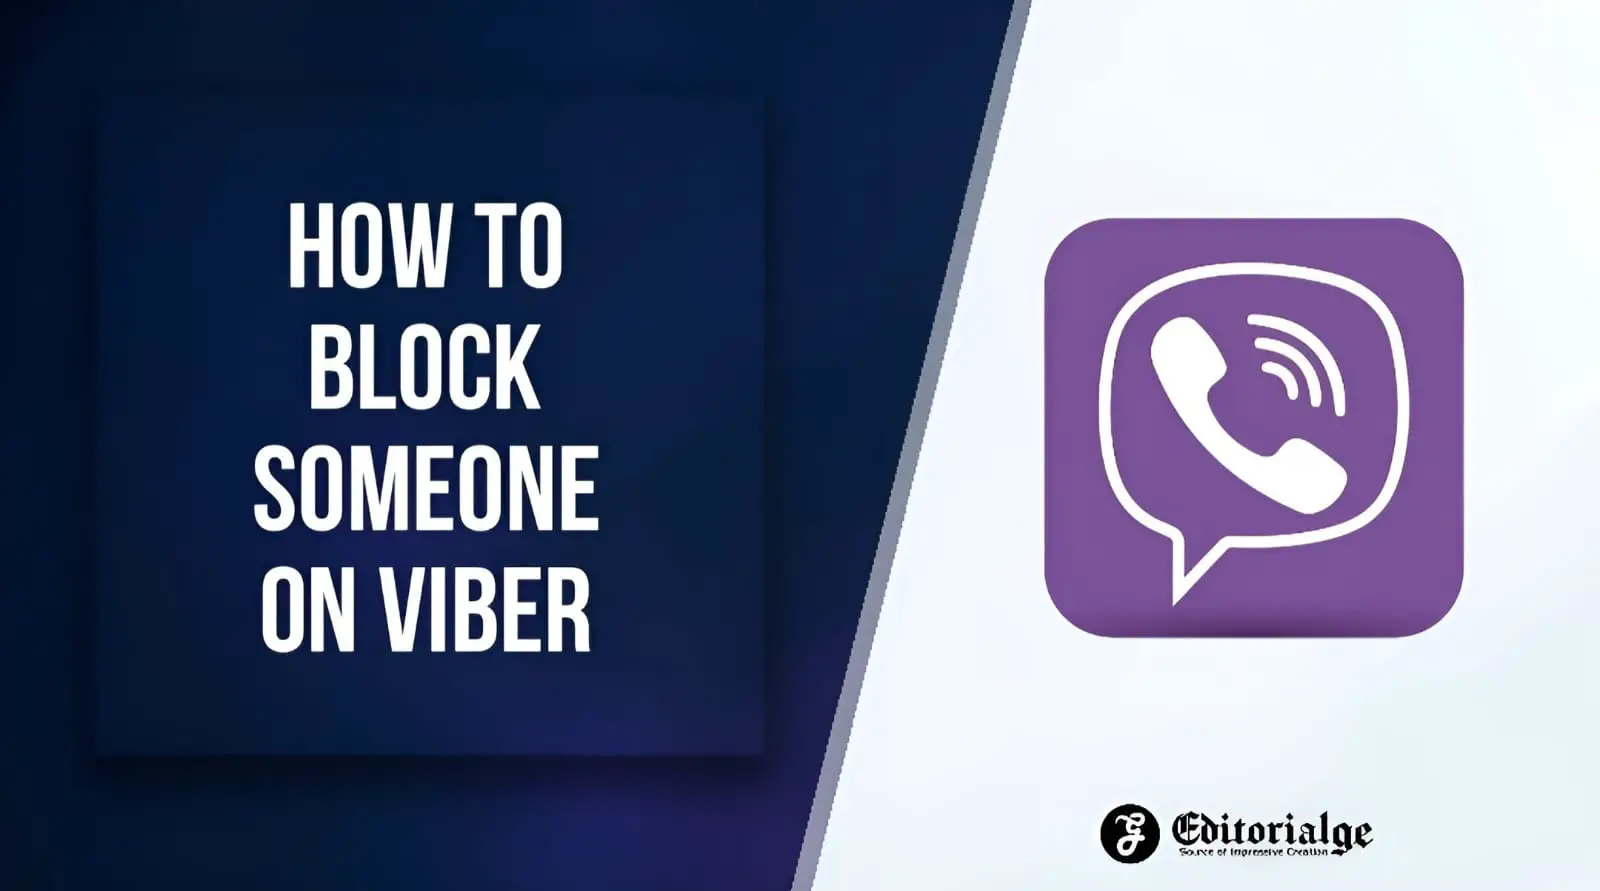 How to block someone on viber